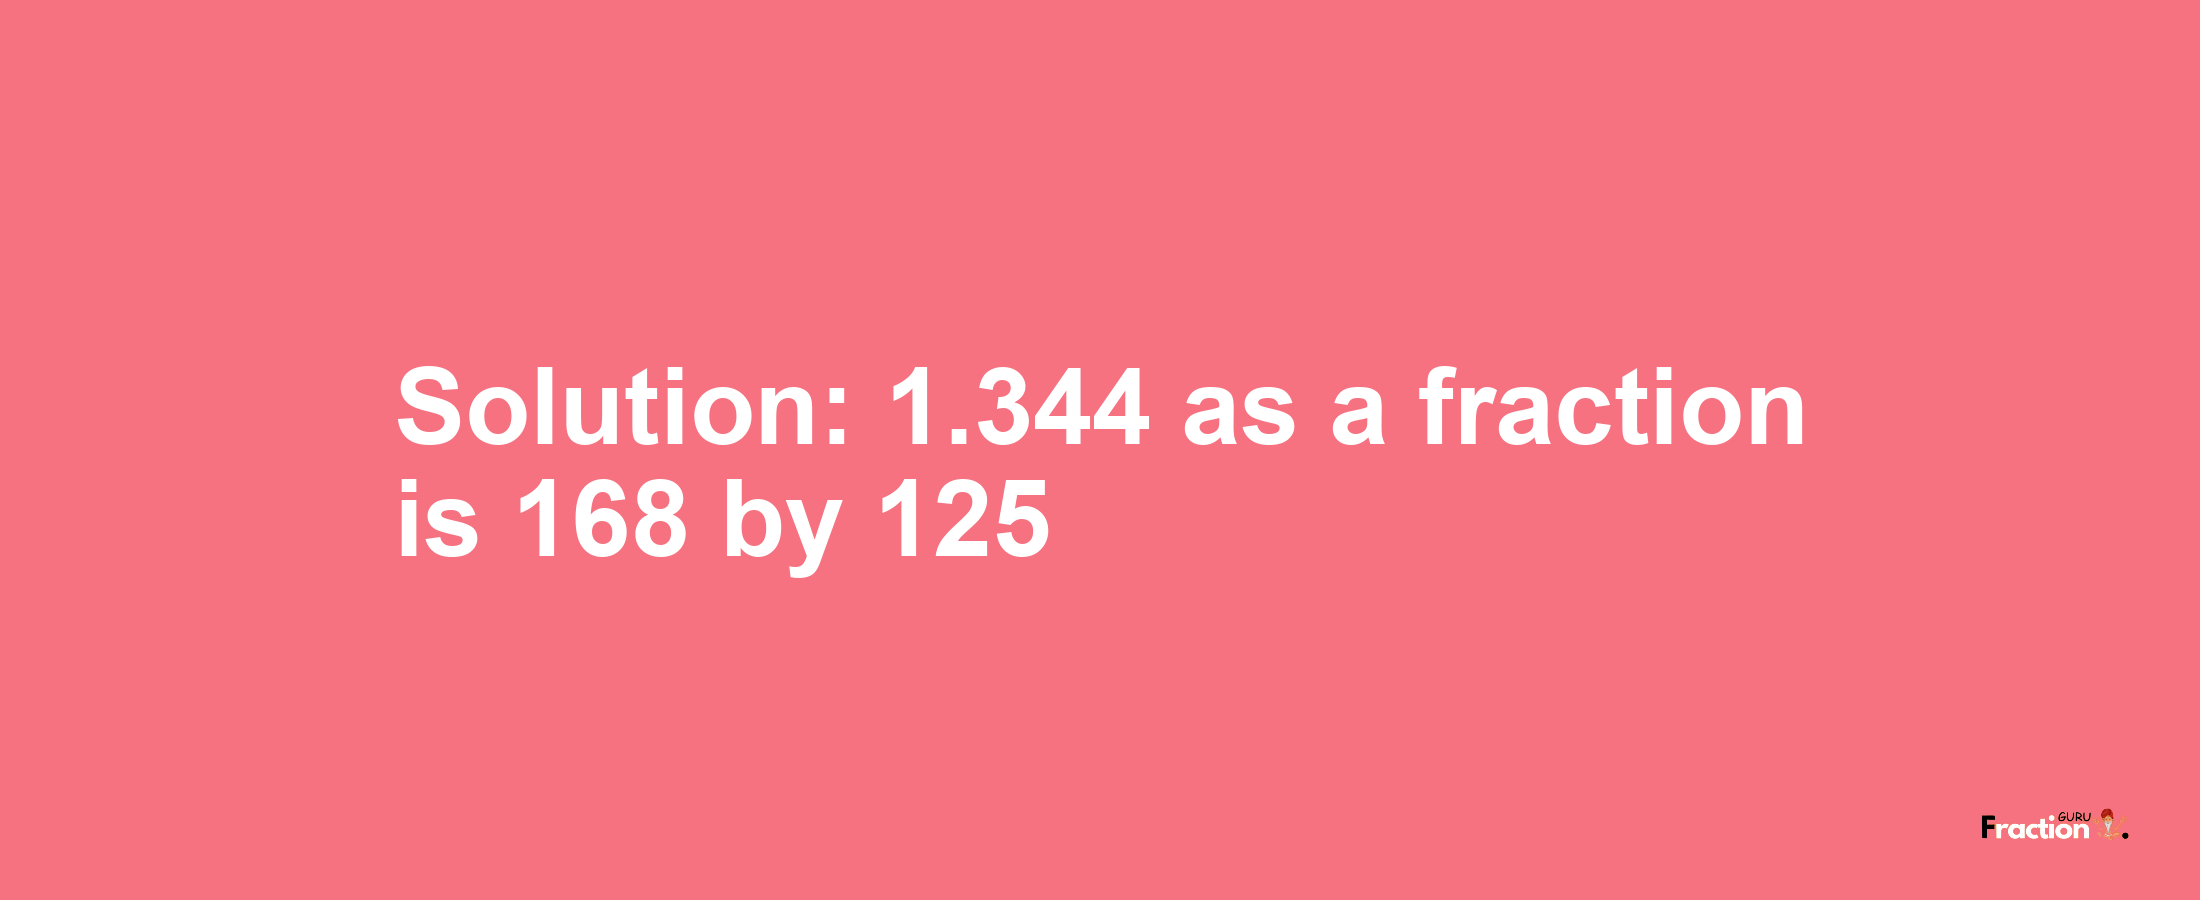 Solution:1.344 as a fraction is 168/125